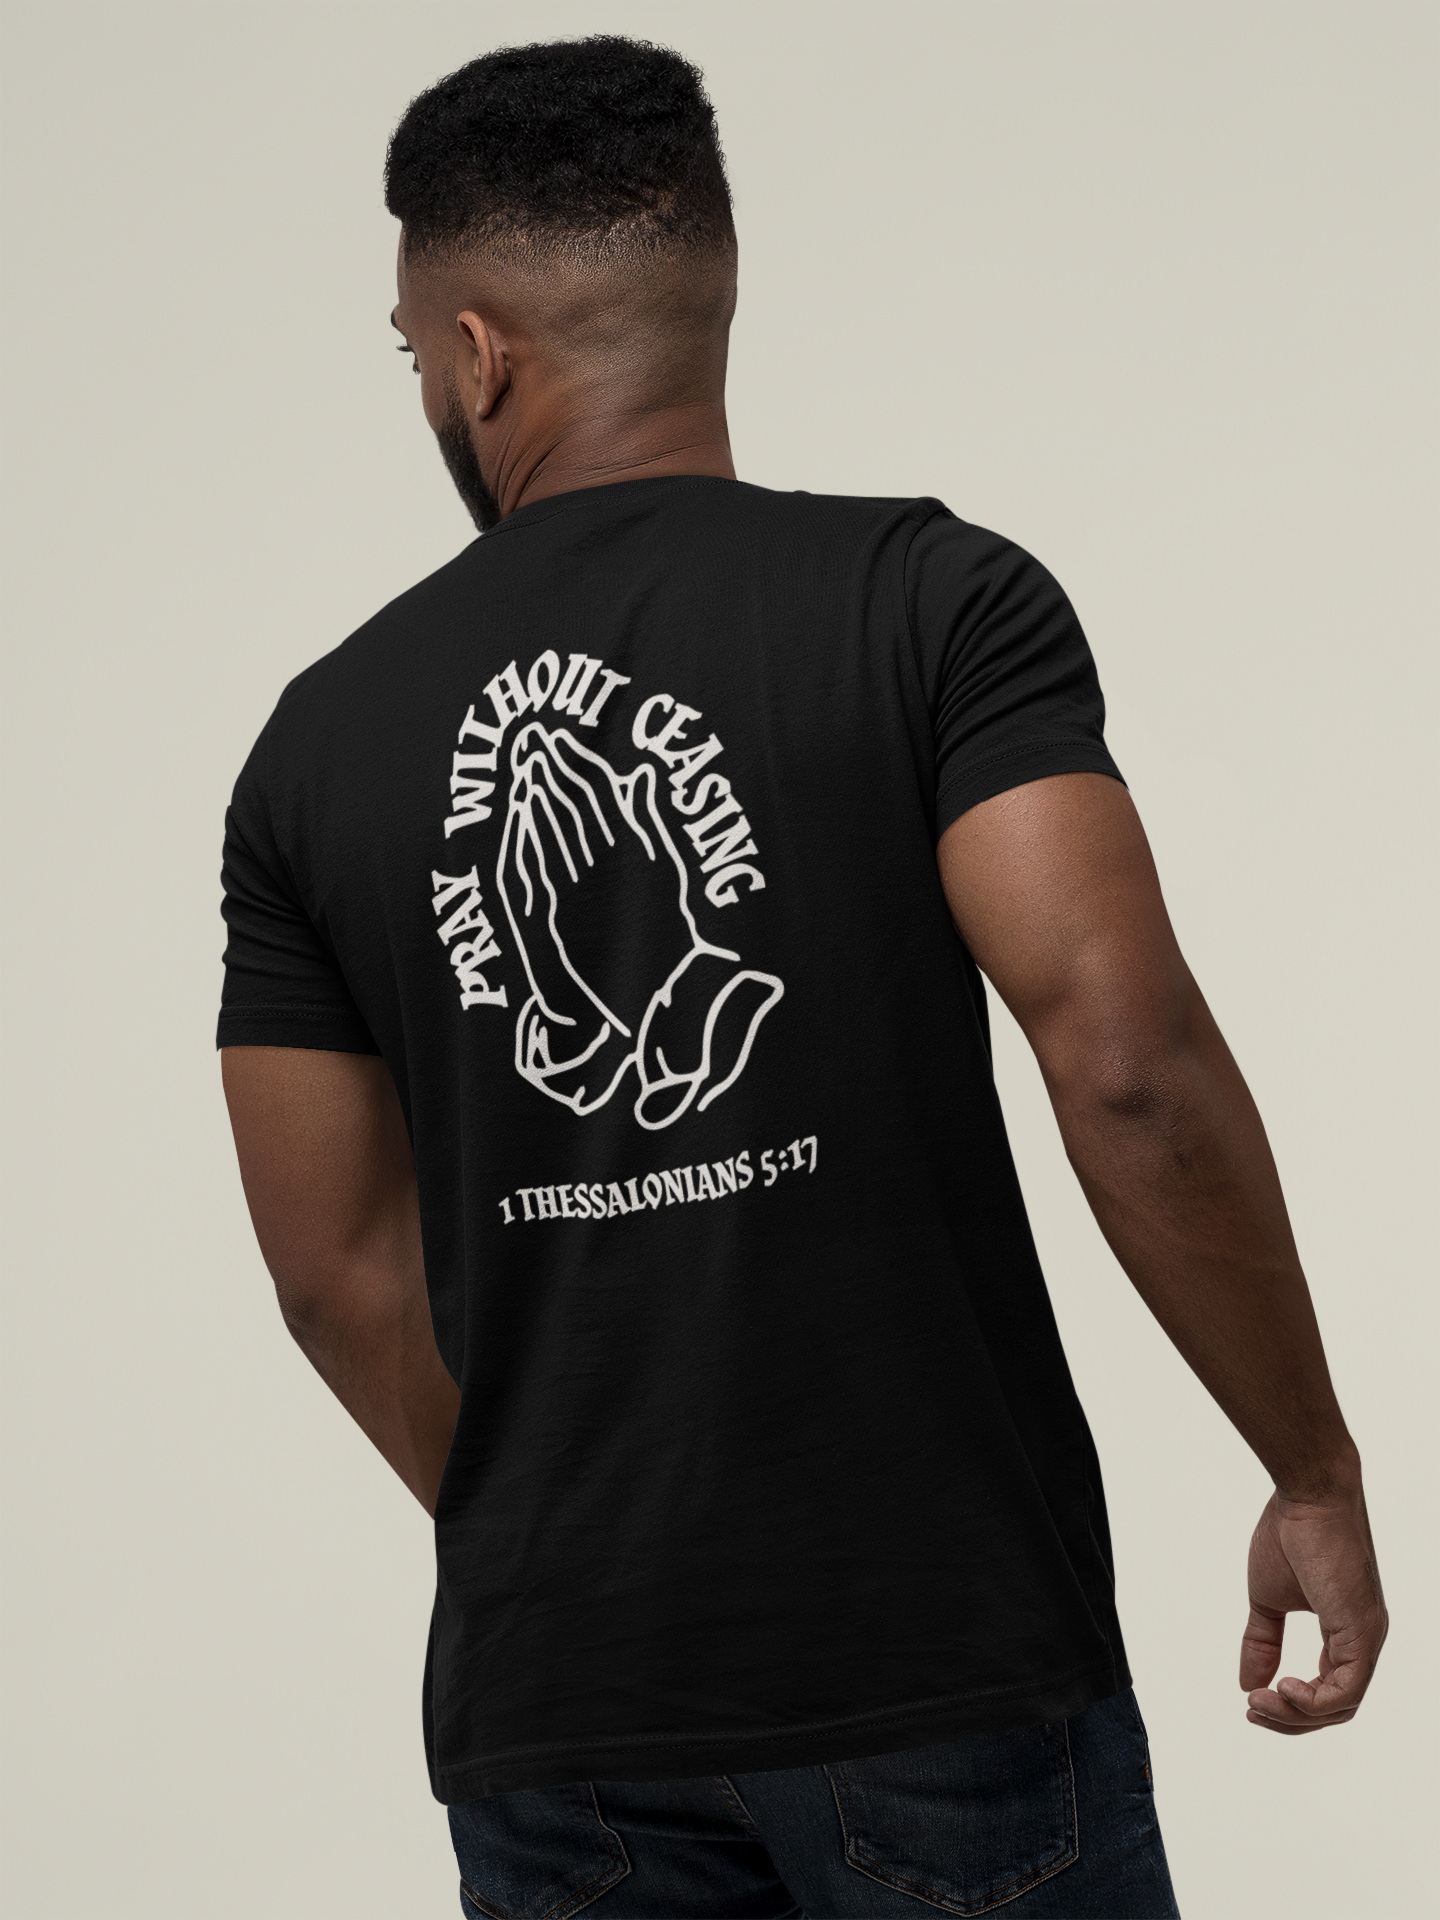 Mens Christian Streetwear t shirt -Pray without Ceasing